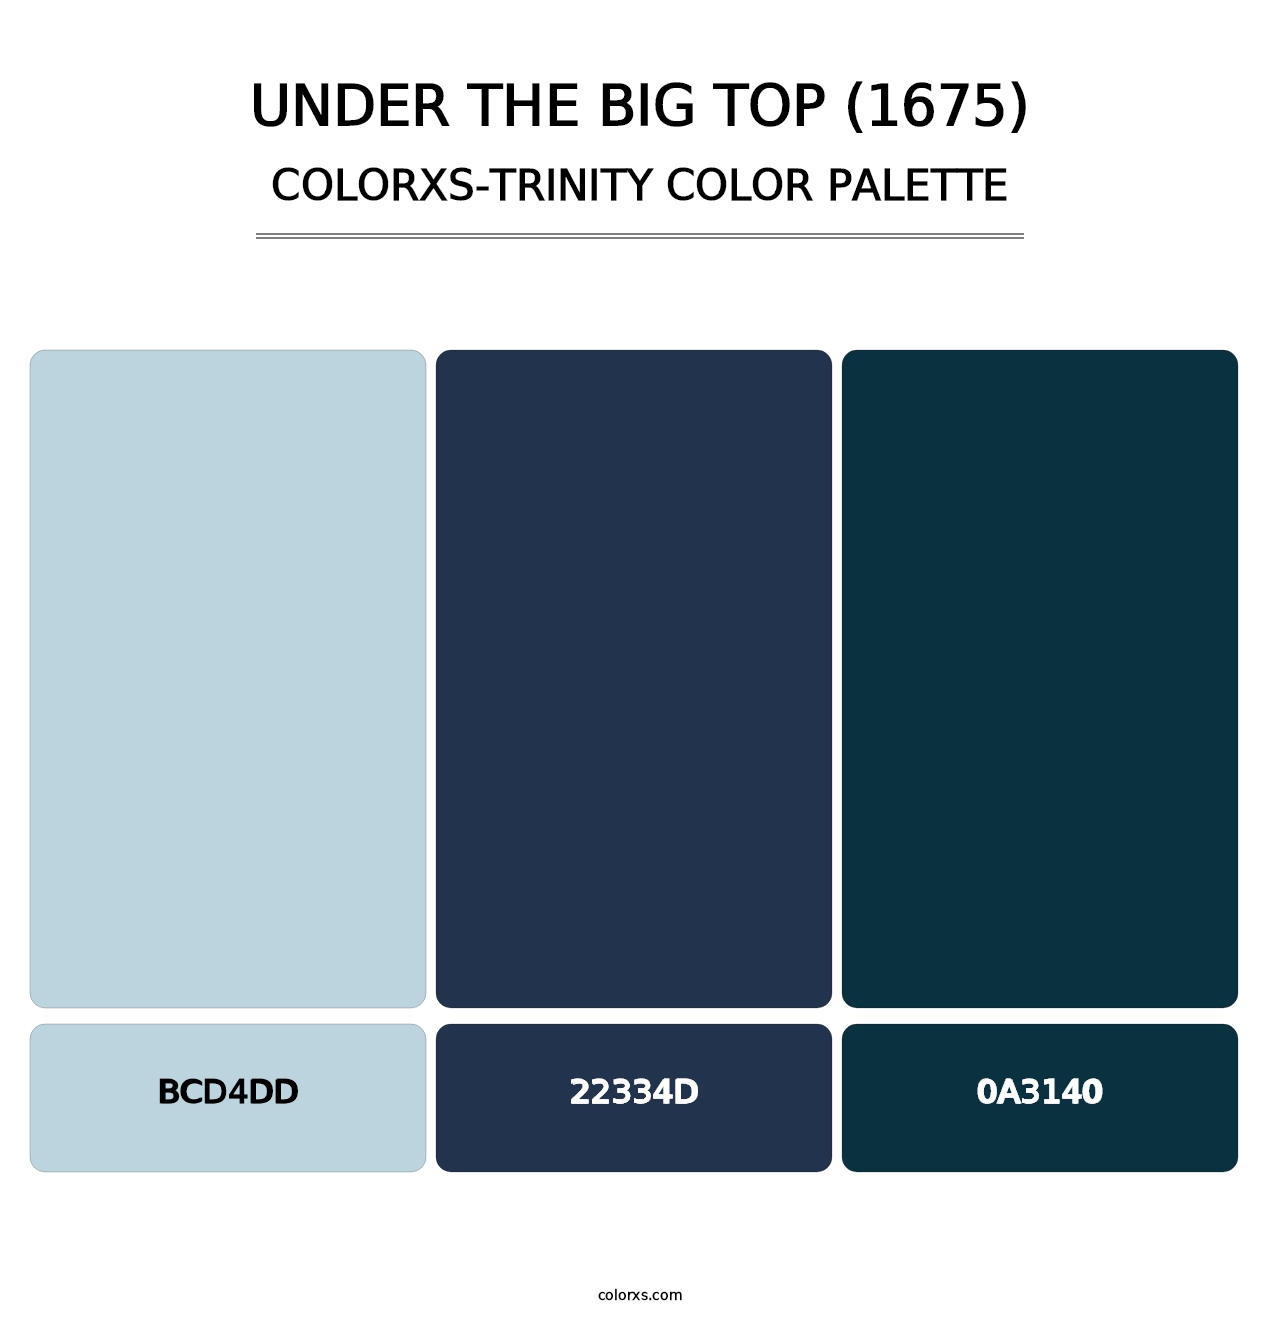 Under the Big Top (1675) - Colorxs Trinity Palette